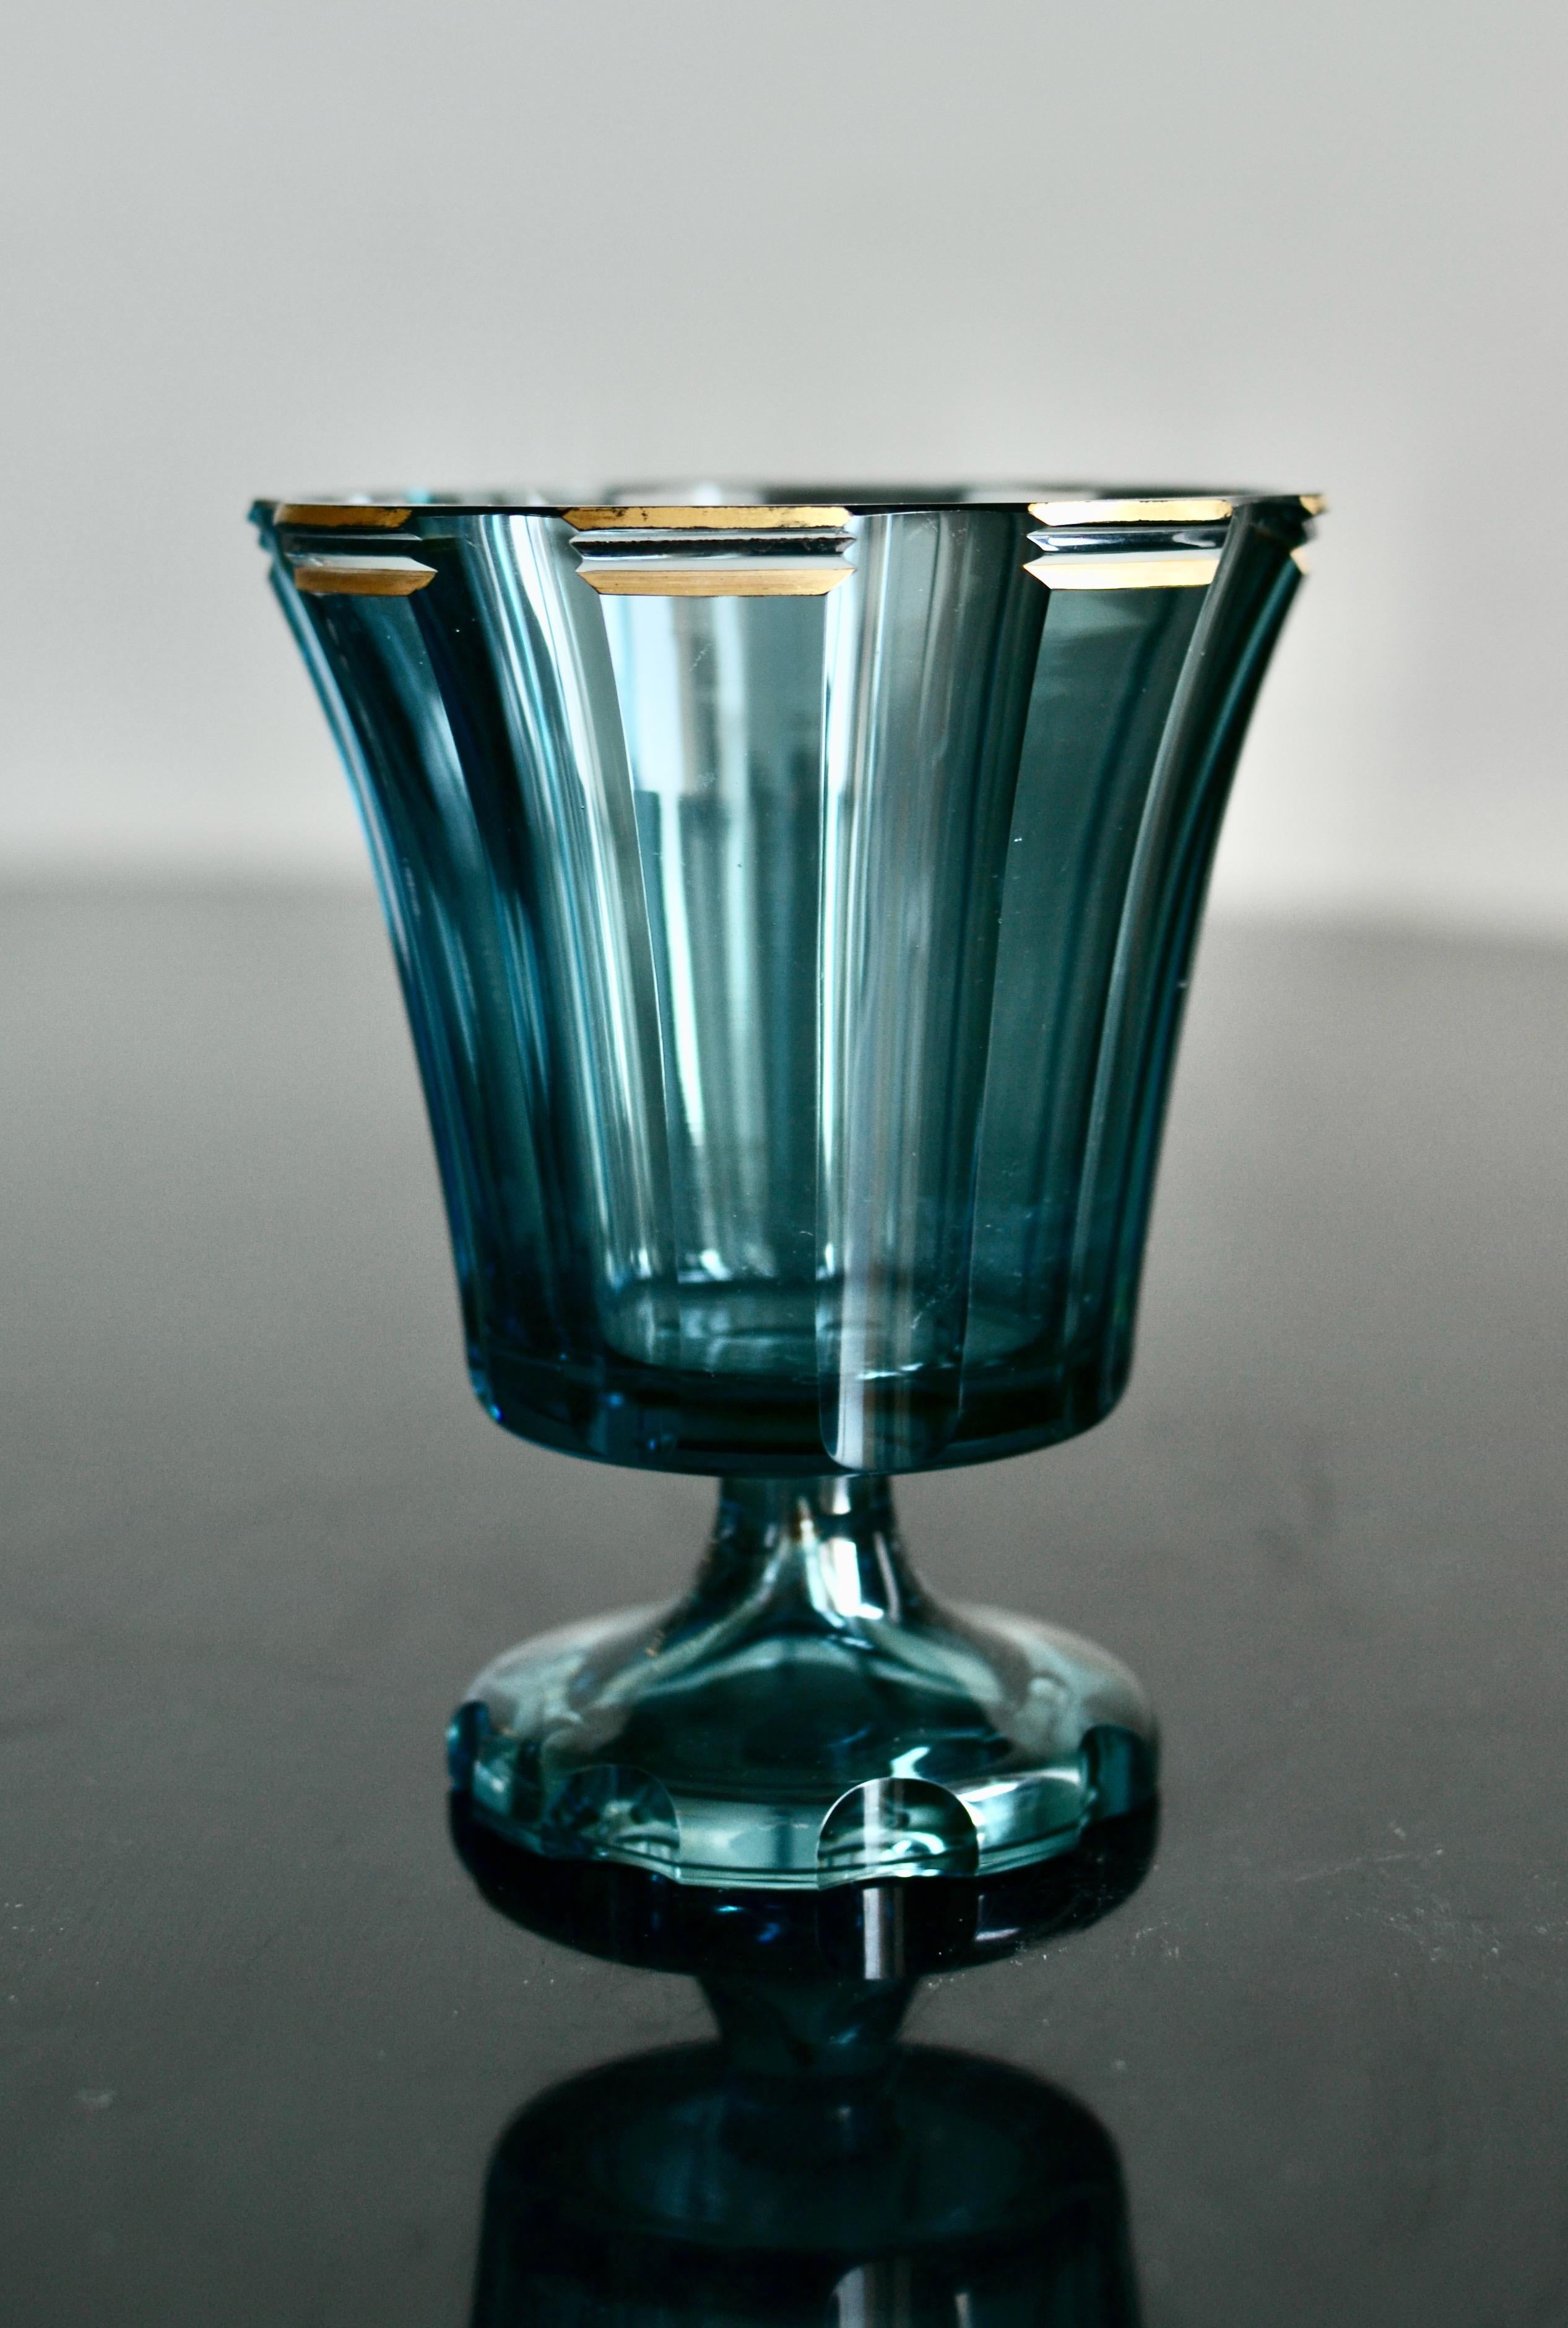 A very nice late 1920´s bluetoned glass bowl by Kosta after a design by Elis Bergh (1881-1954) Signed B305 Kosta on the bottom. Very nice condition. 

Elis Bergh, was an architect and designer, best remembered for his glass art and fixtures. His